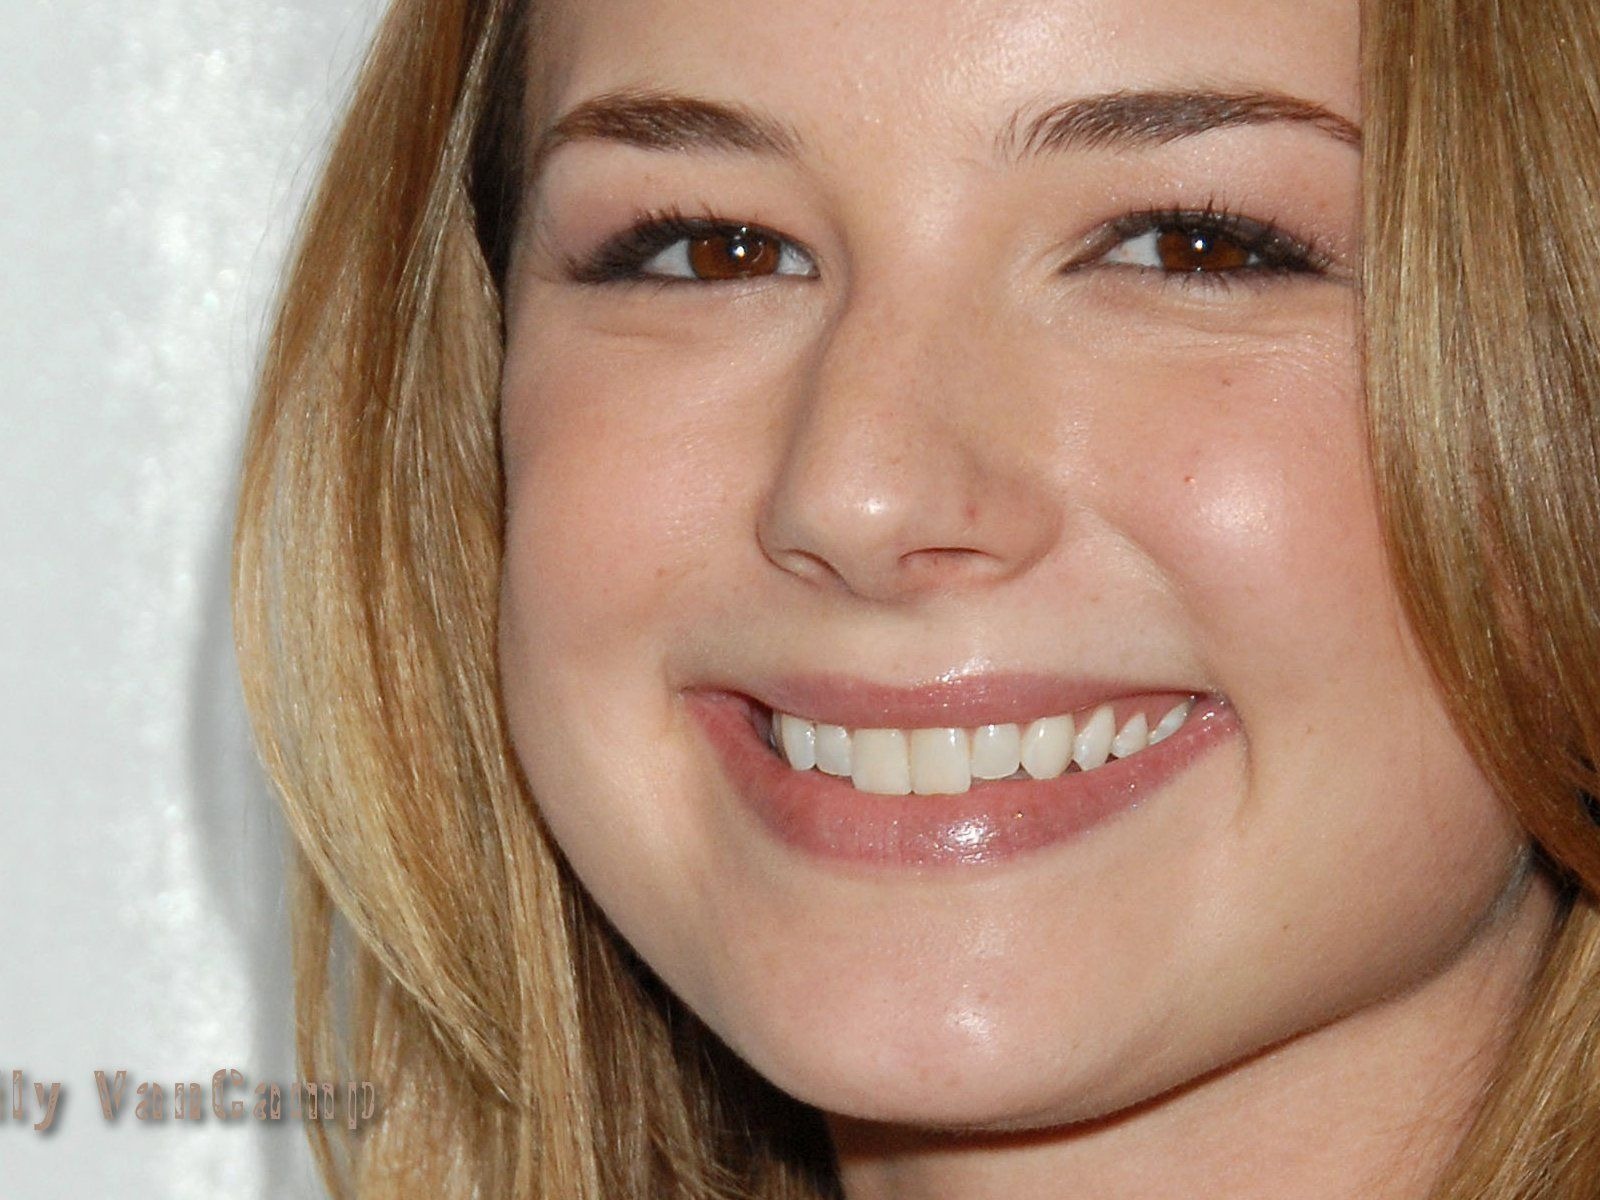 Emily VanCamp #009 - 1600x1200 Wallpapers Pictures Photos Images.